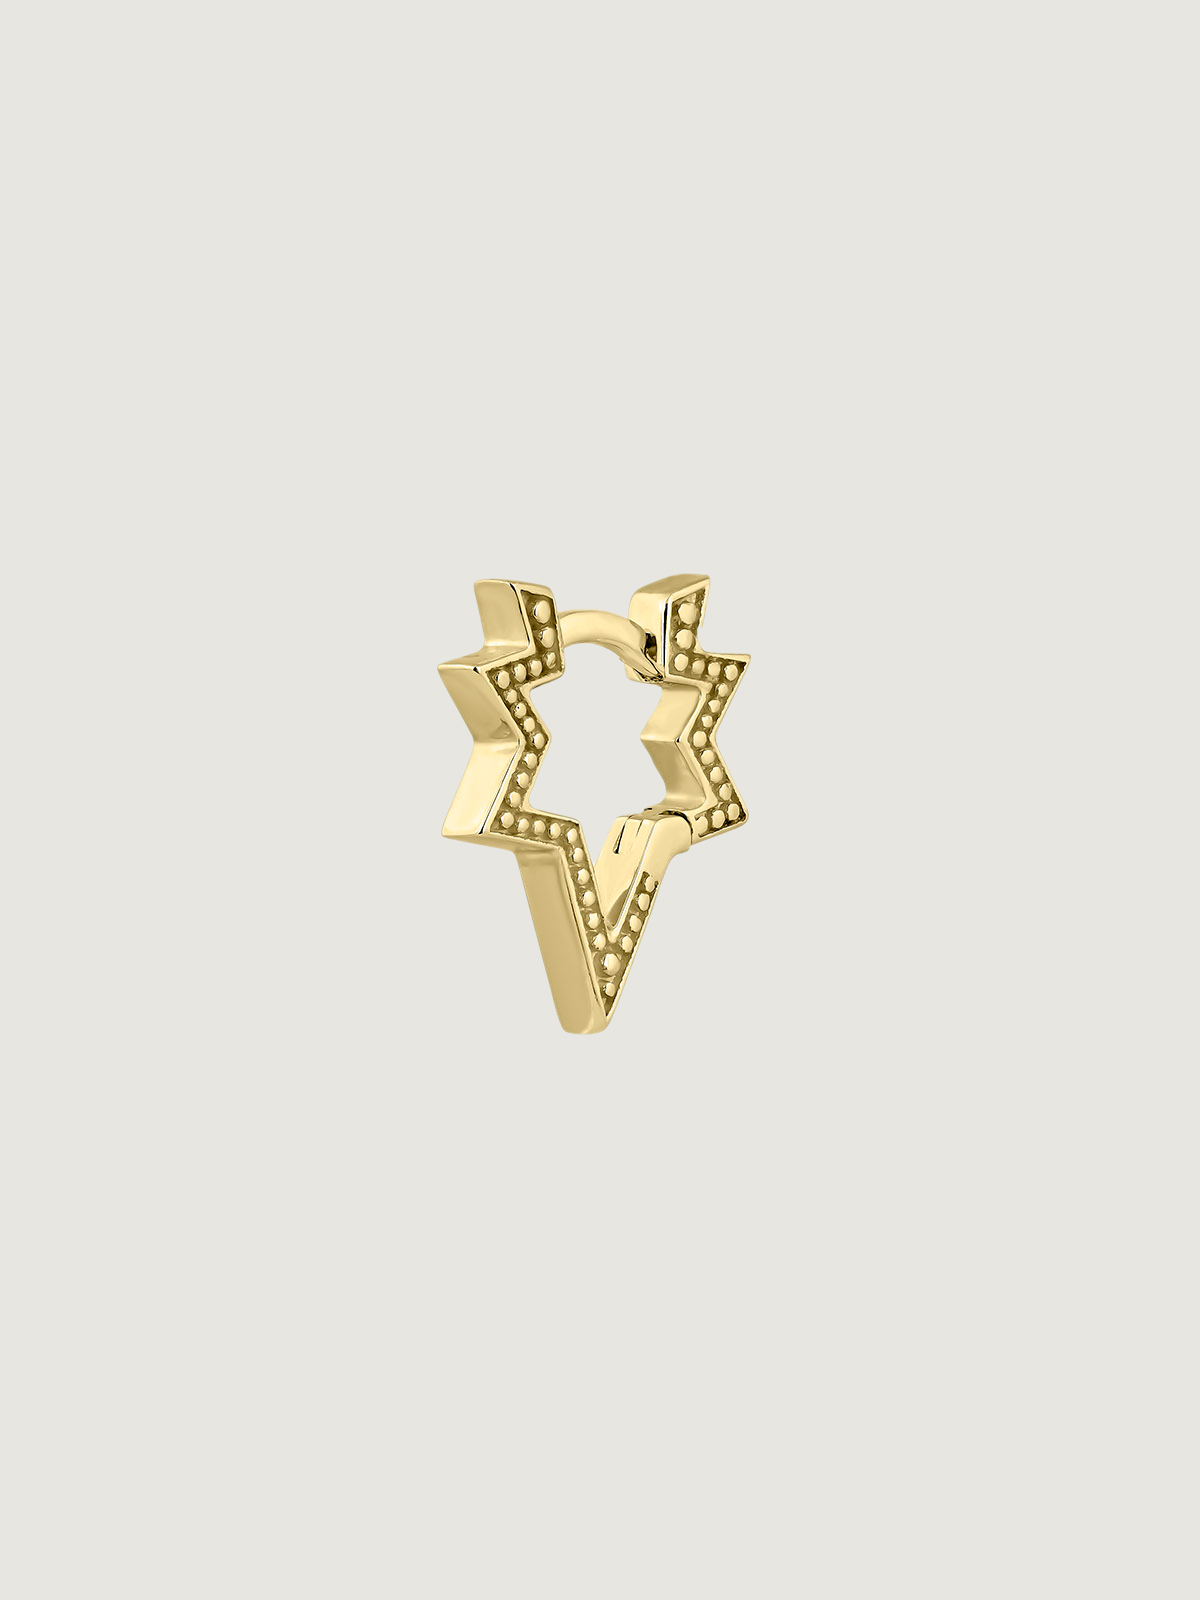 9K yellow gold single earring in the shape of a star.